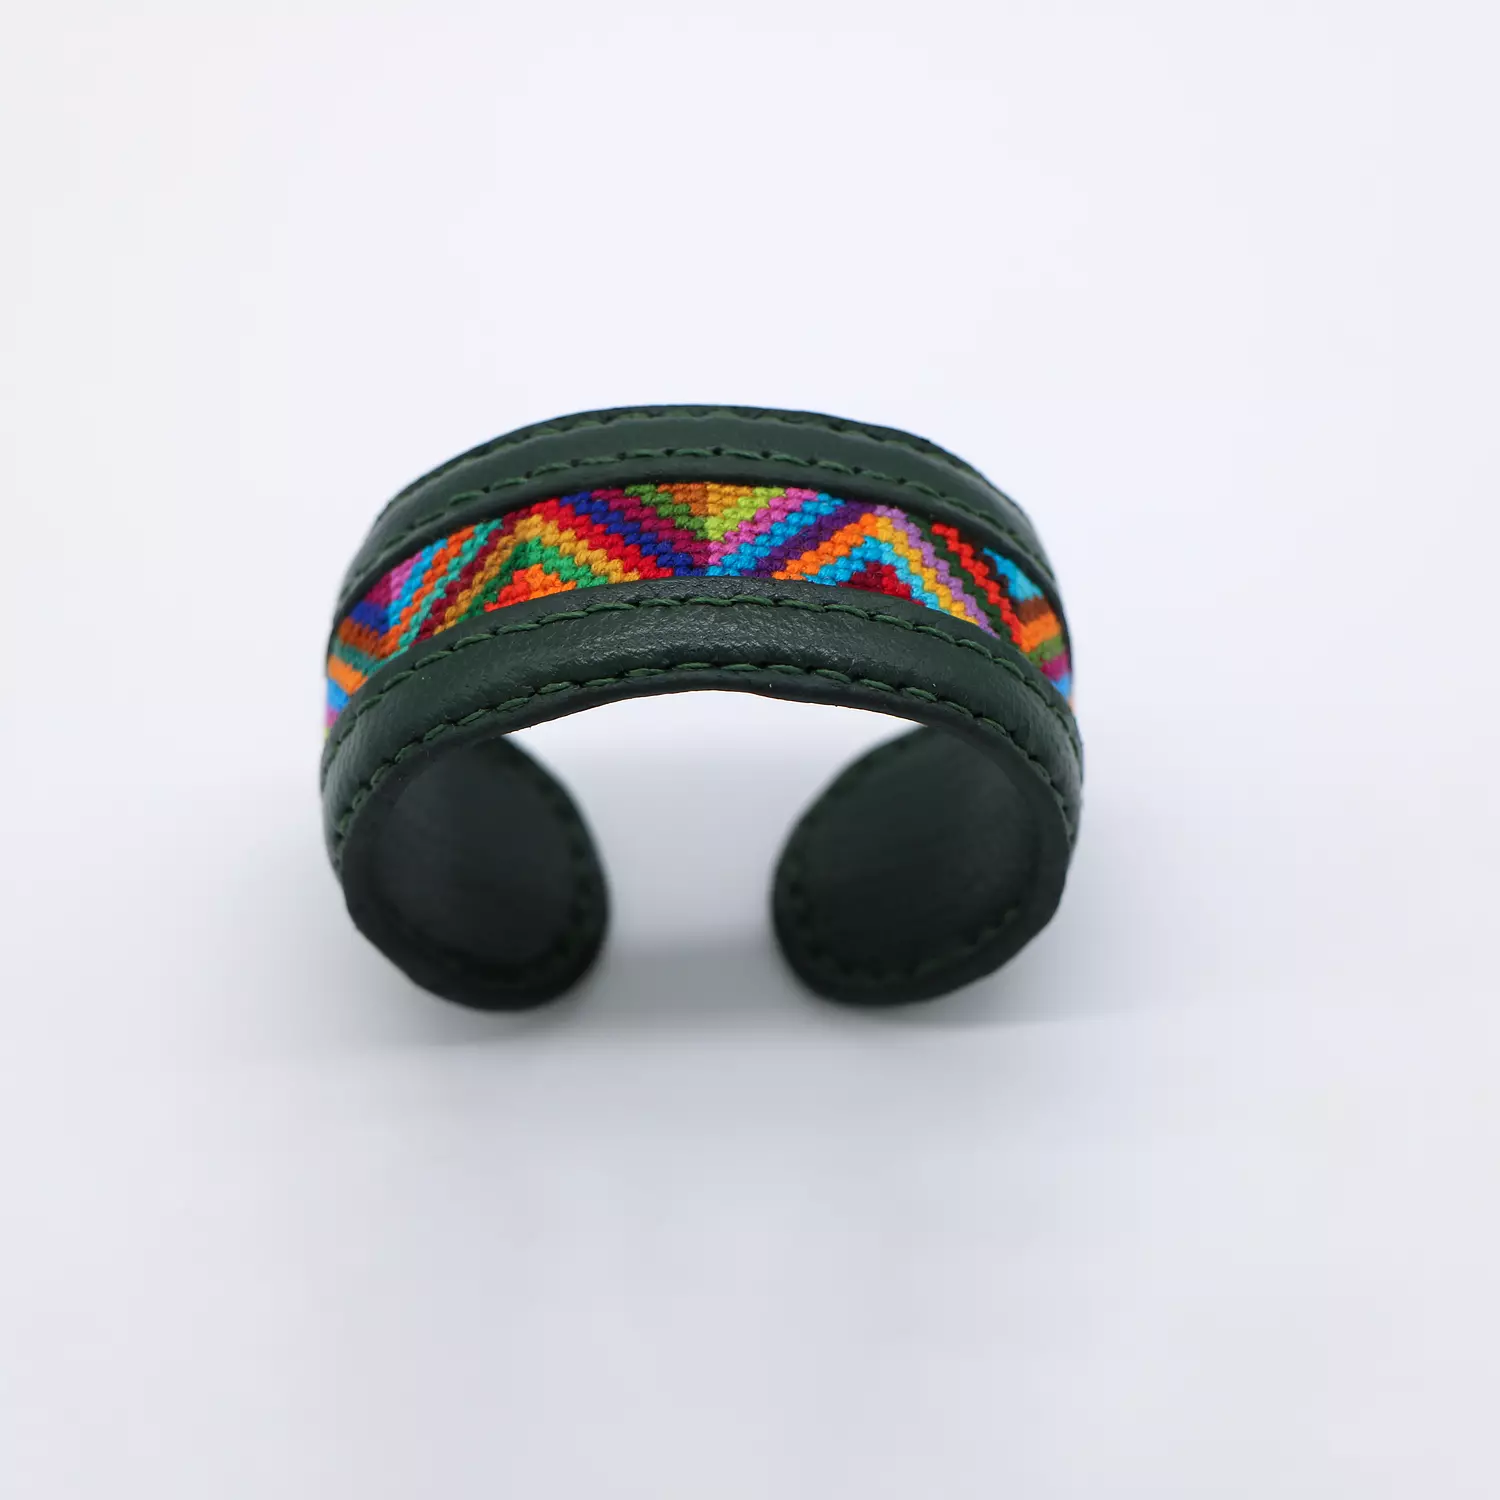 Handmade Genuine leather cuff with colorful Cross-stitching hover image